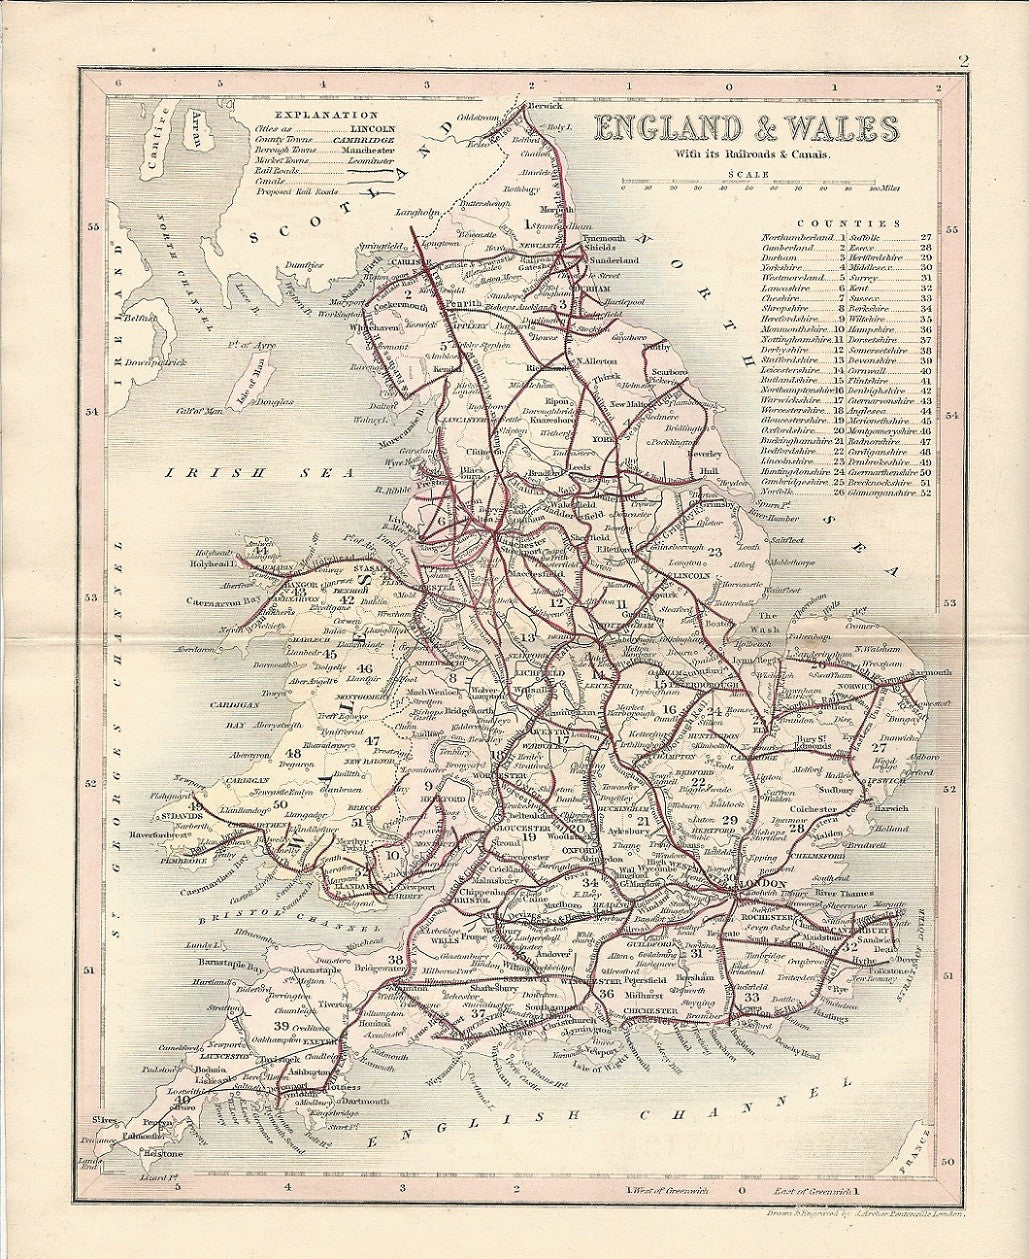 England & Wales Railways & Canals antique map 1845